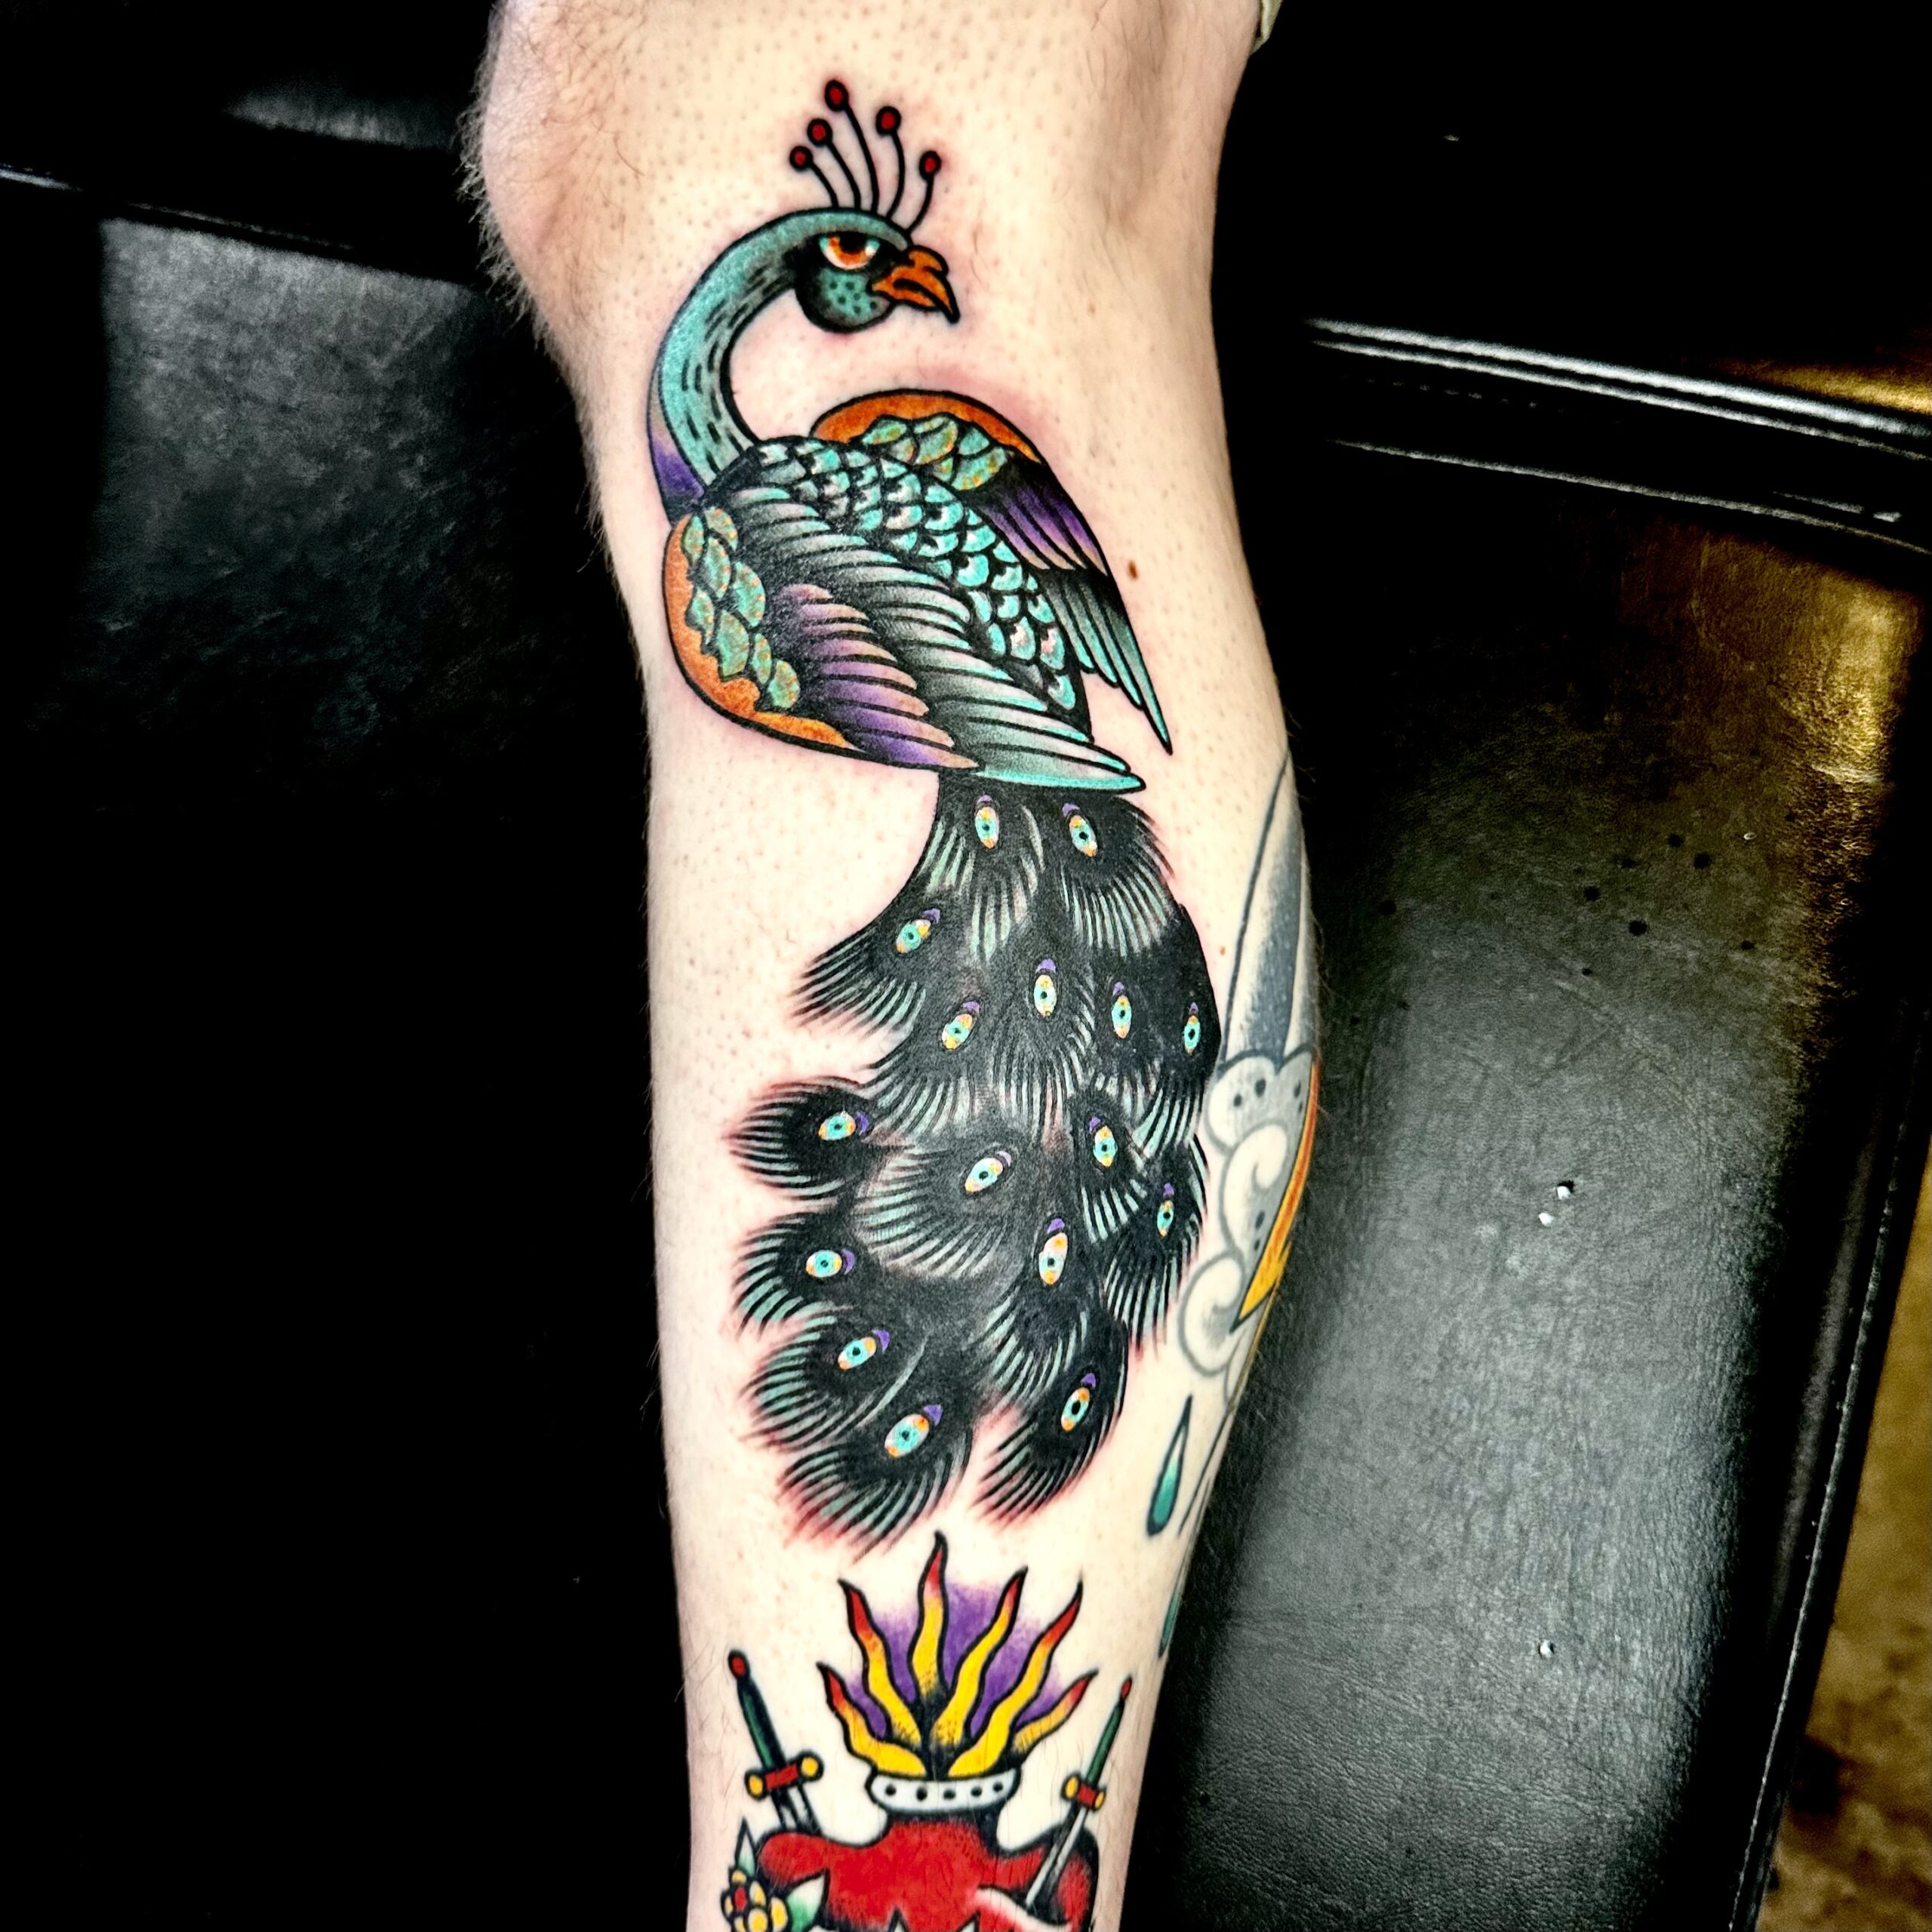 Tattoo of a peacock on a man's leg